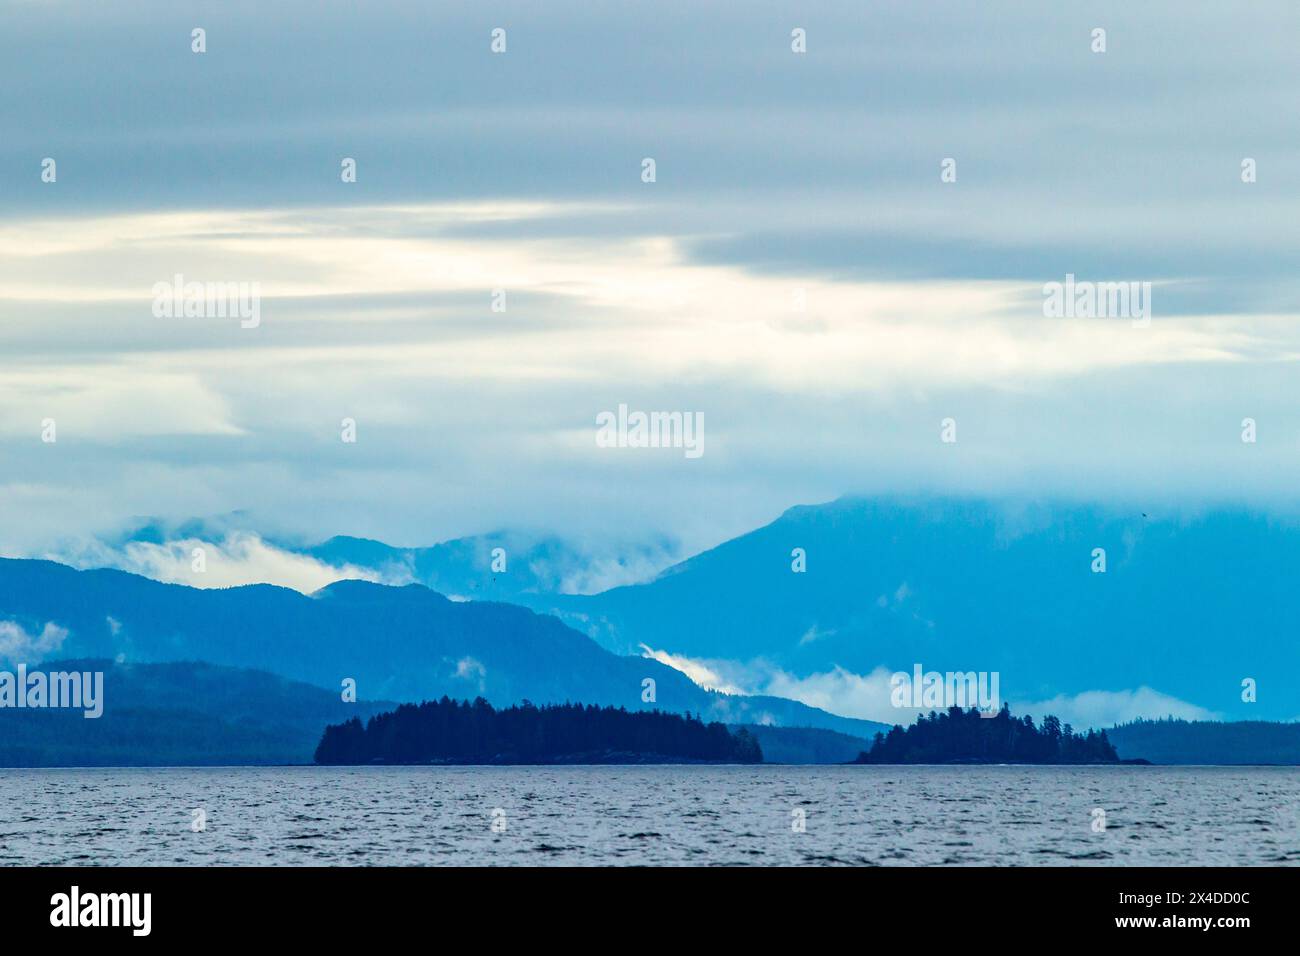 Canada, British Columbia, Inside Passage. Mountain and ocean landscape. Stock Photo